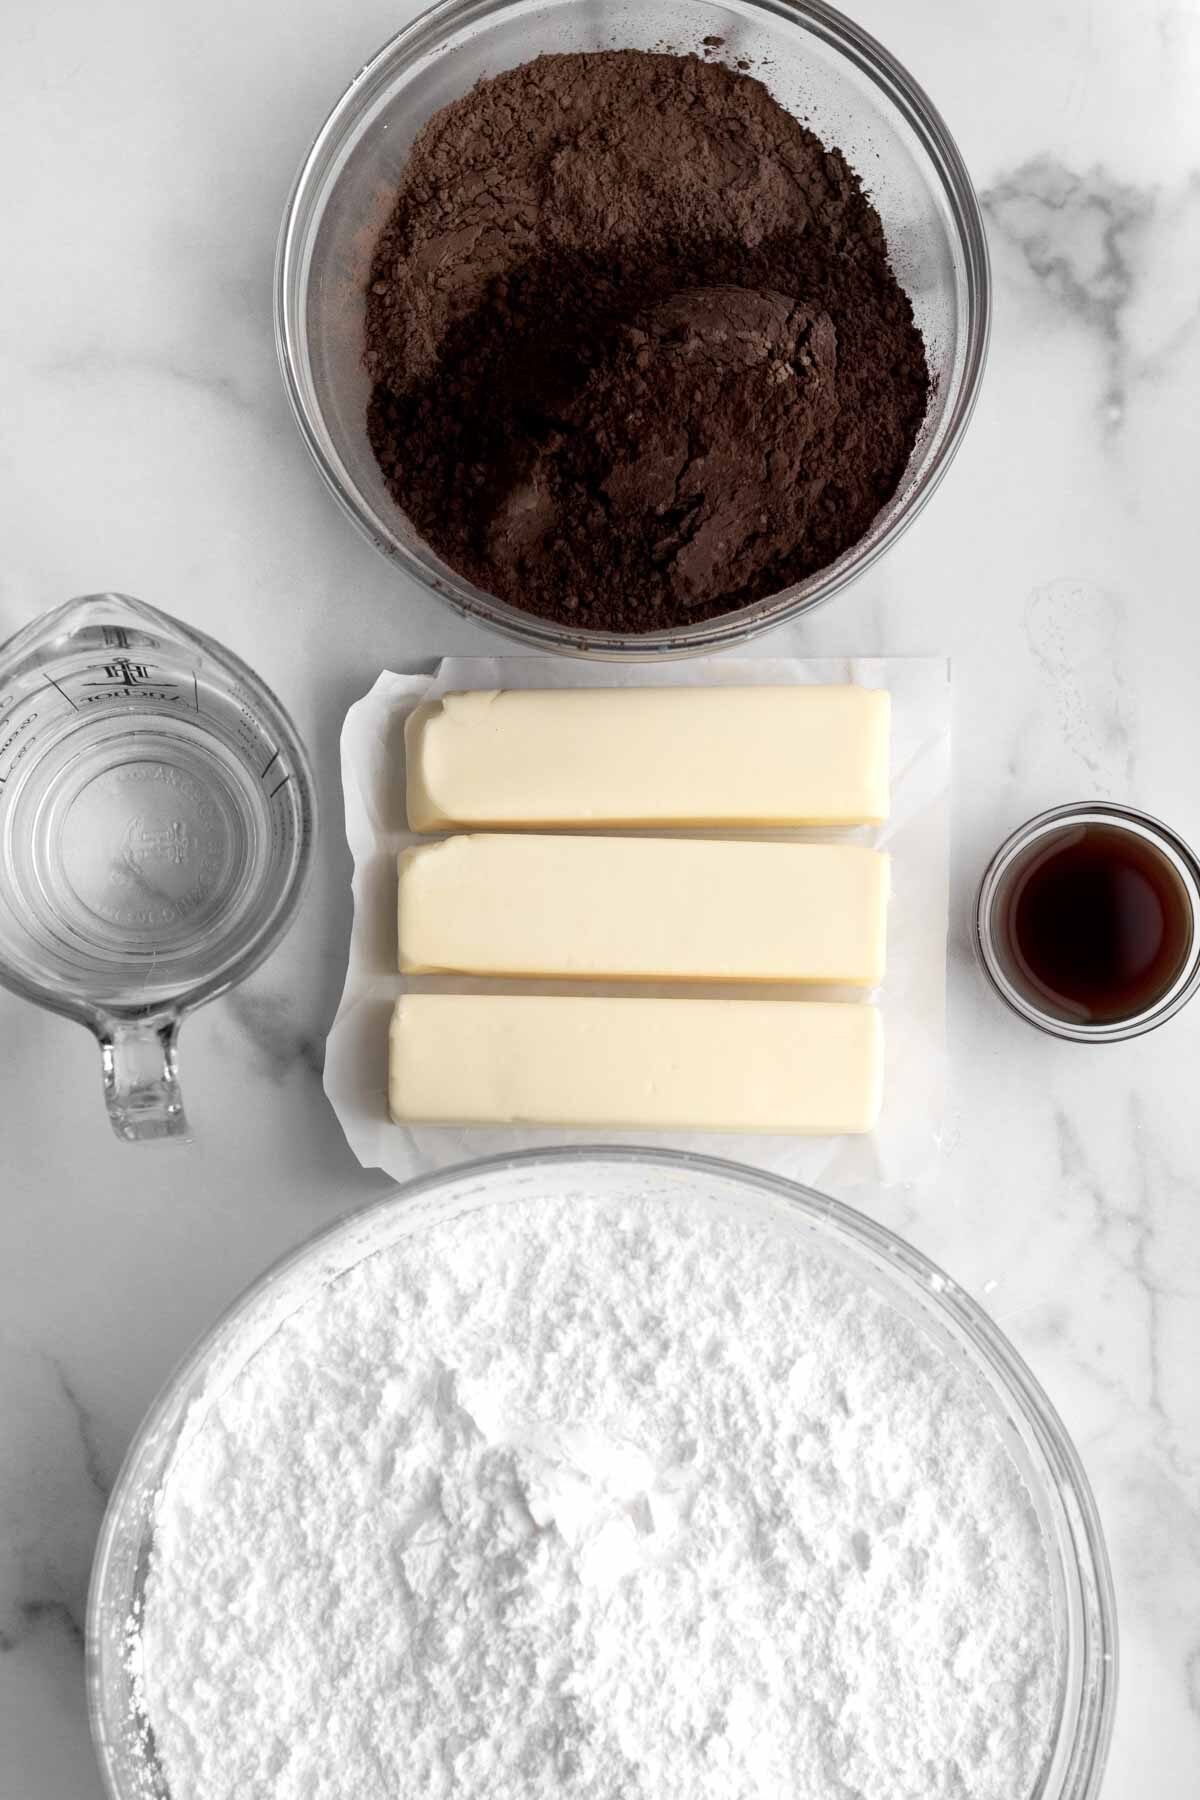 The ingredients for Chocolate Fudge Frosting.